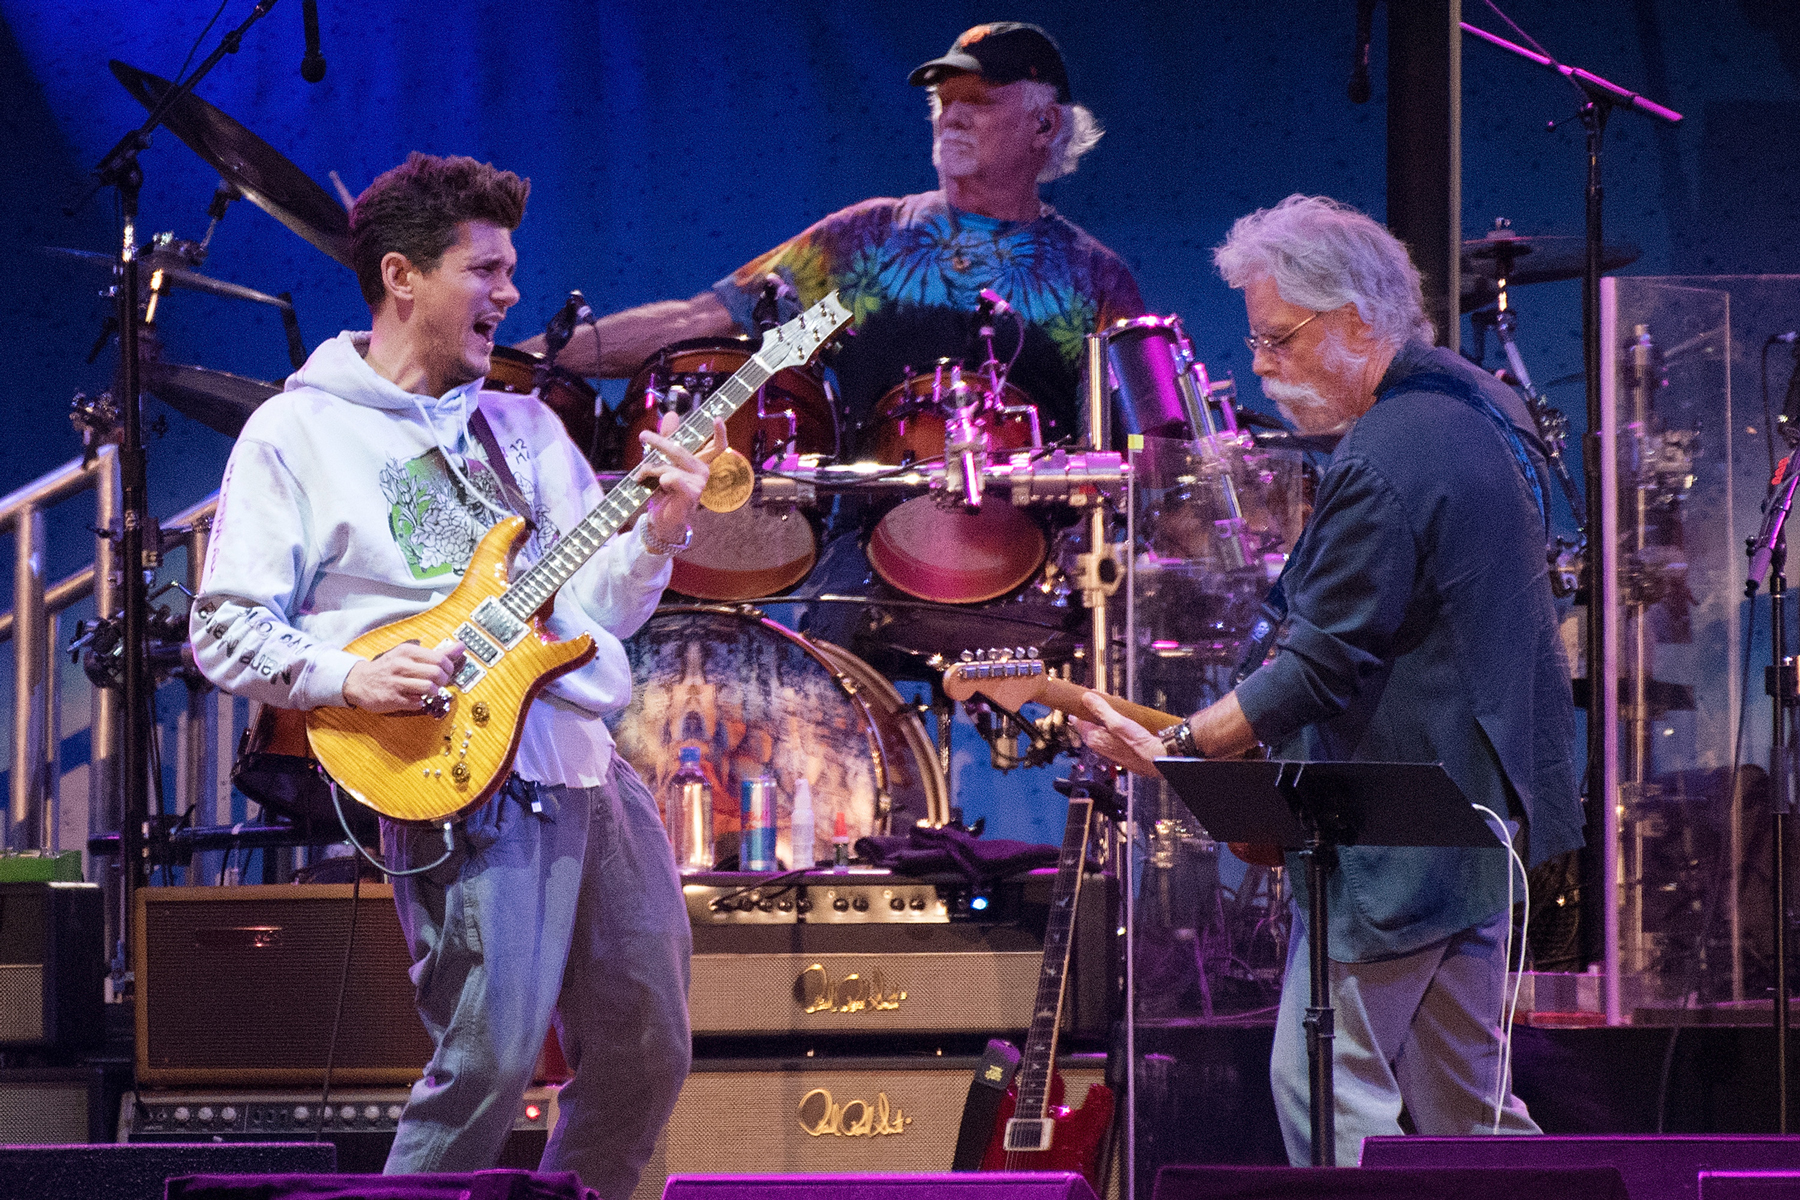 SAN FRANCISCO, CA - NOVEMBER 09:  John Mayer, Bill Kreutzmann and Bob Weir of Dead and Company perform during the Band Together Bay Area Benefit Concert at AT&T Park on November 9, 2017 in San Francisco, California.  (Photo by C Flanigan/FilmMagic)